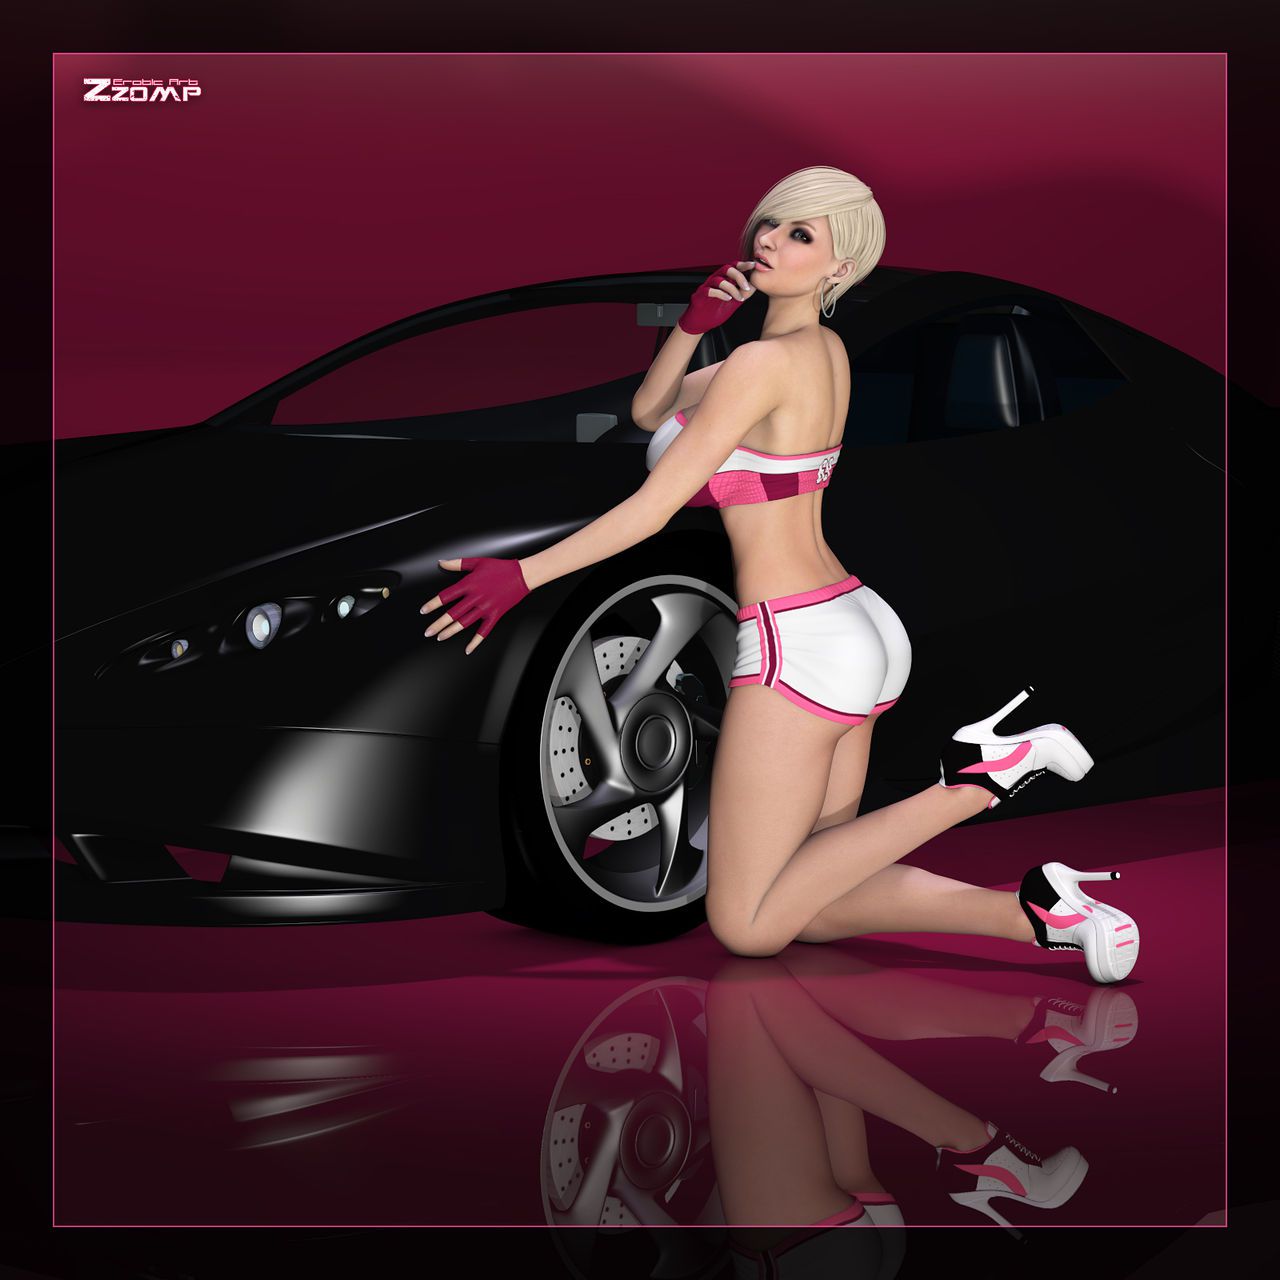 [Zzomp] MCB CarShow Chick 3